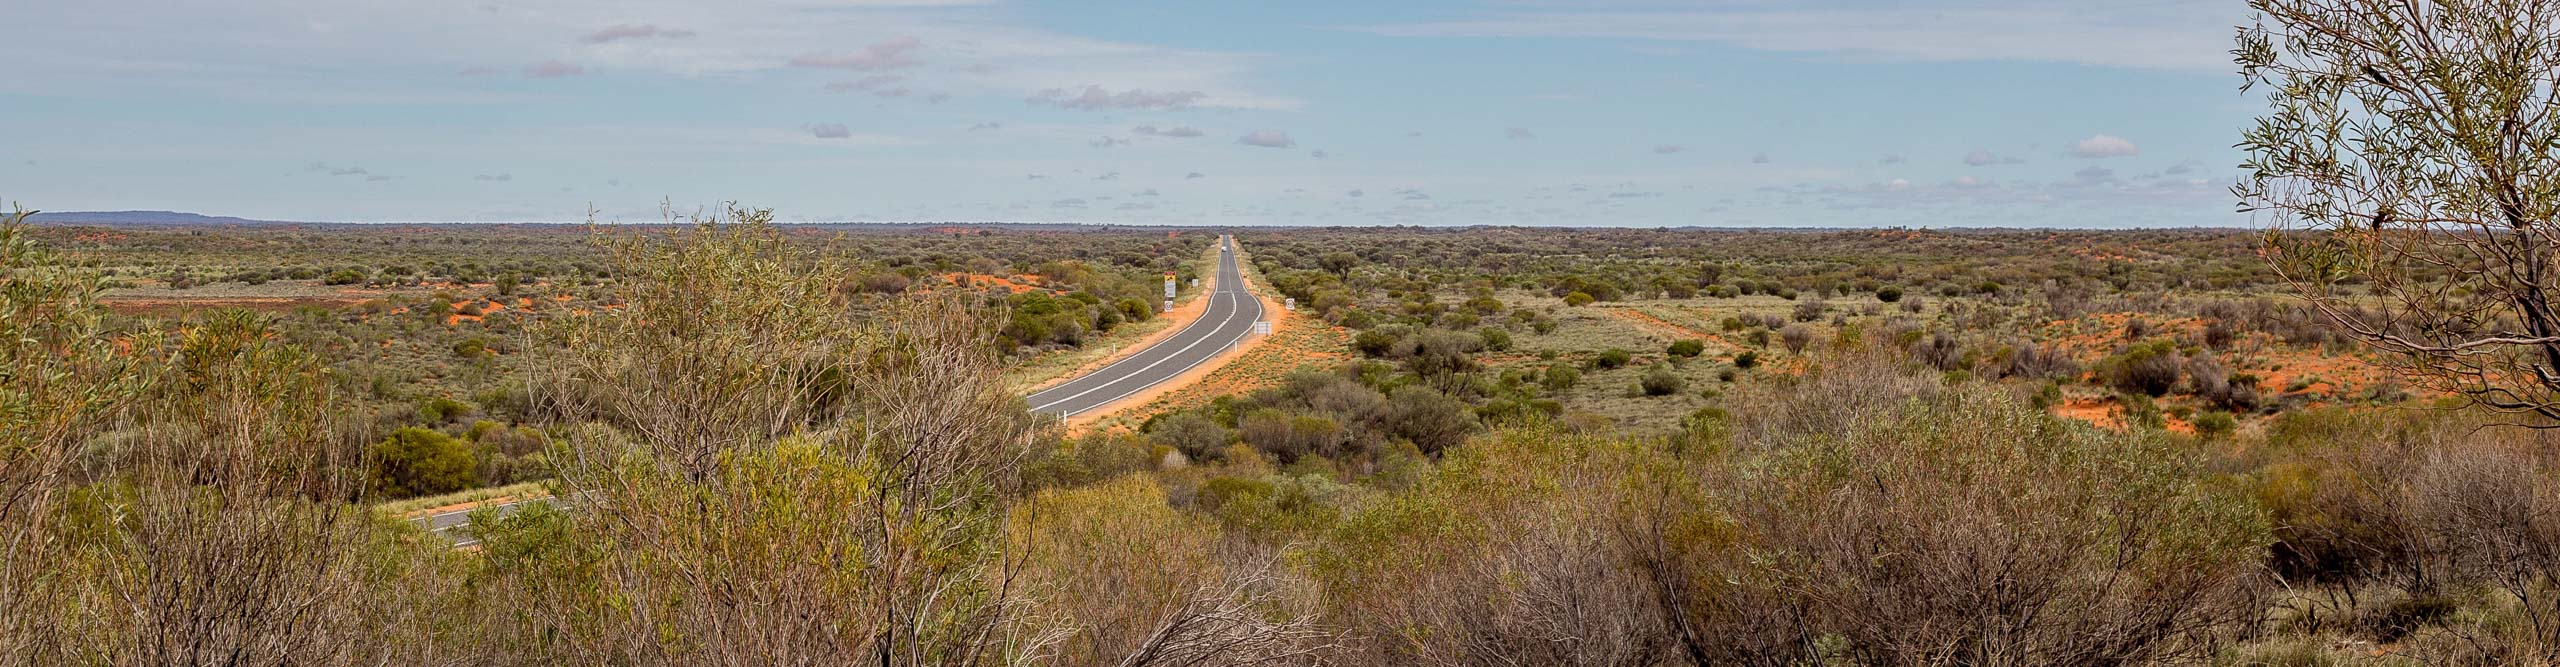 Outback highway in the Northern Territory, Australia 